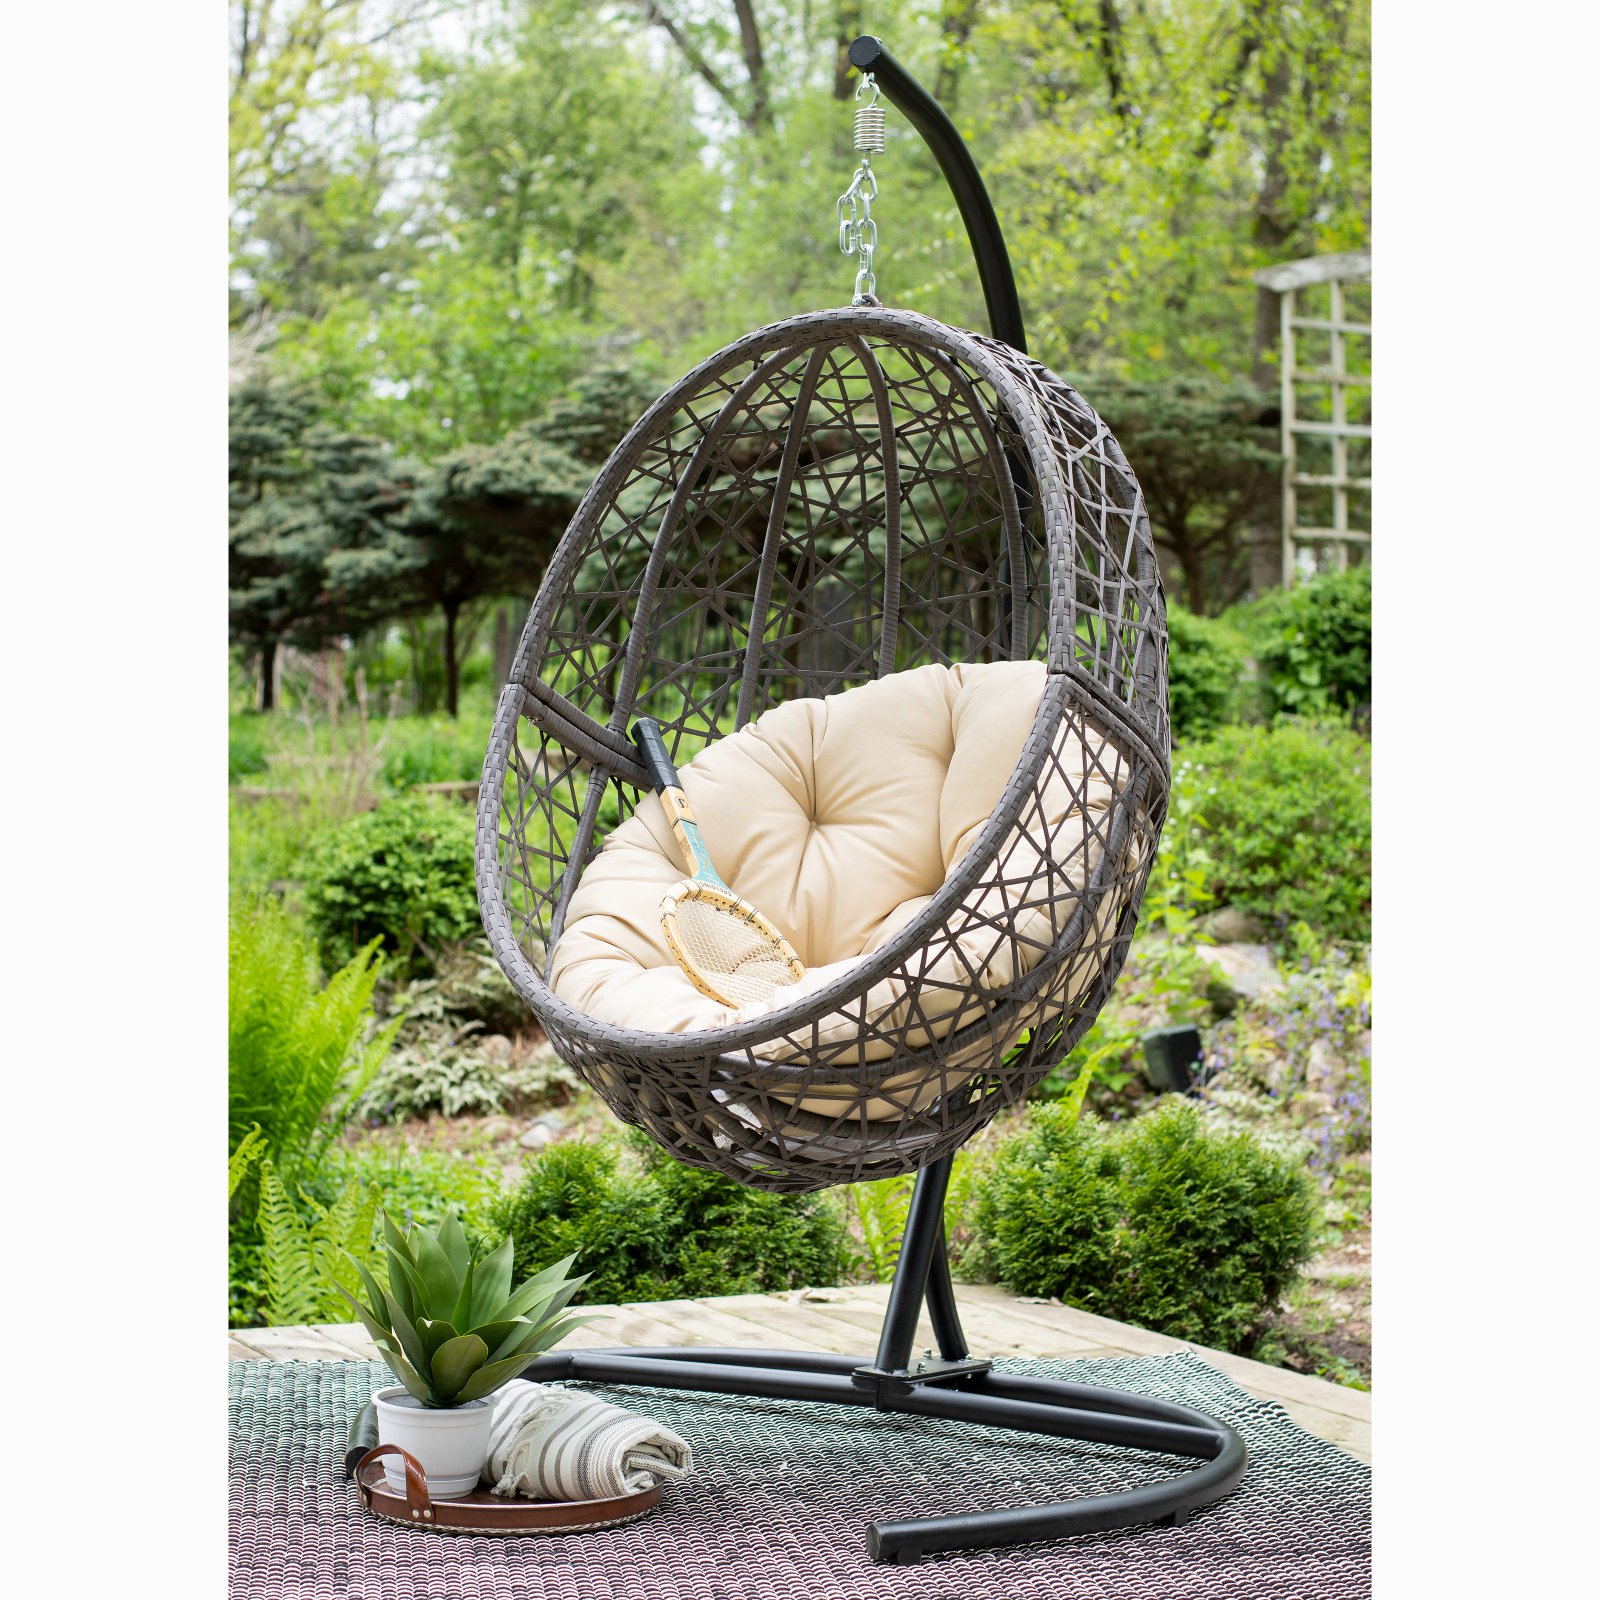 Belham Living Resin Wicker Hanging Egg Chair with Cushion and Stand - image 3 of 11